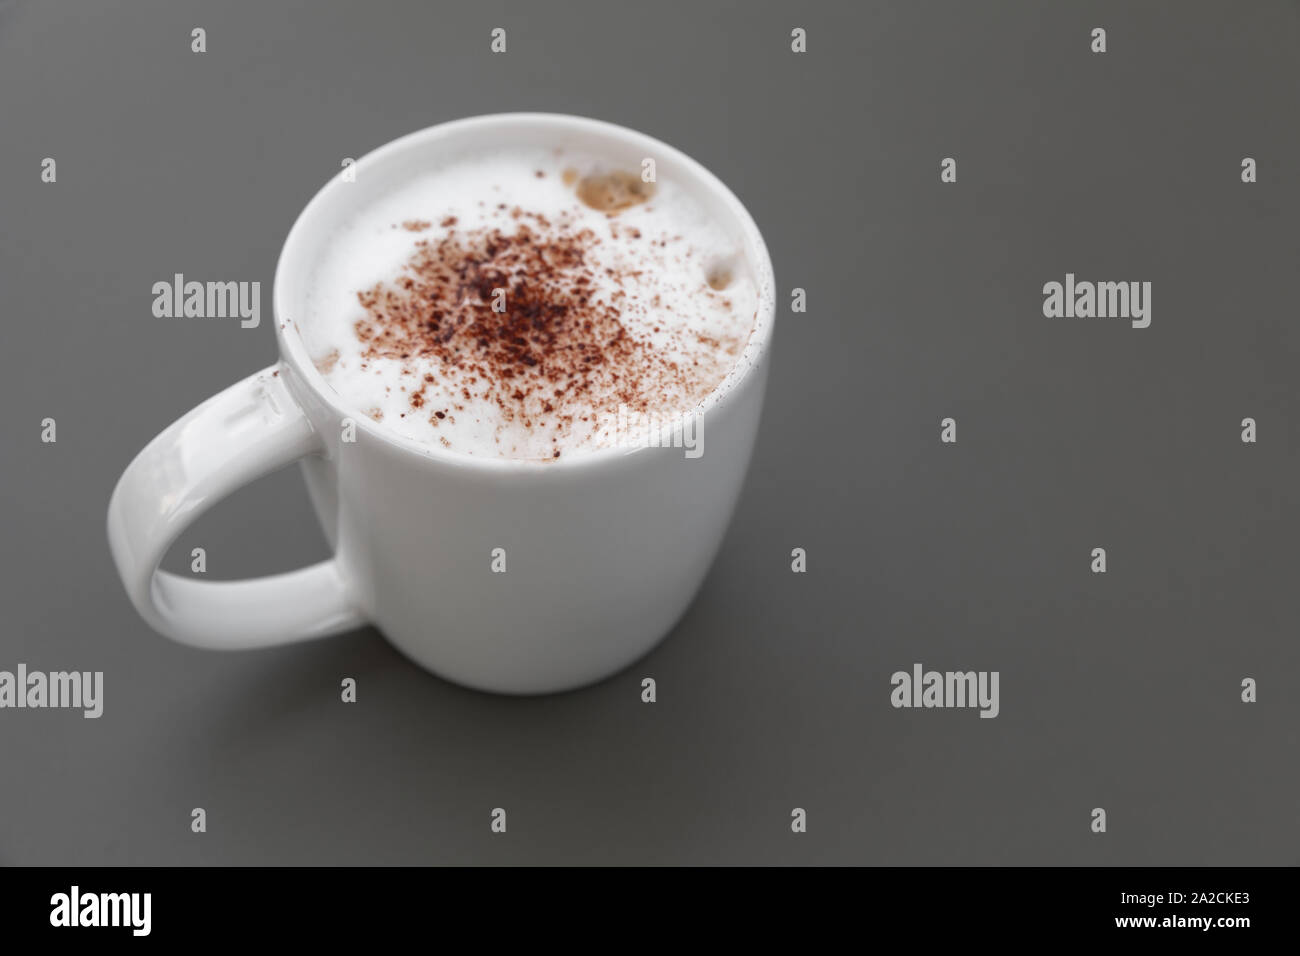 One Cappuccino. Cup of coffee with milk foam and cinnamon stands on a gray table. Close-up photo with soft selective focus Stock Photo